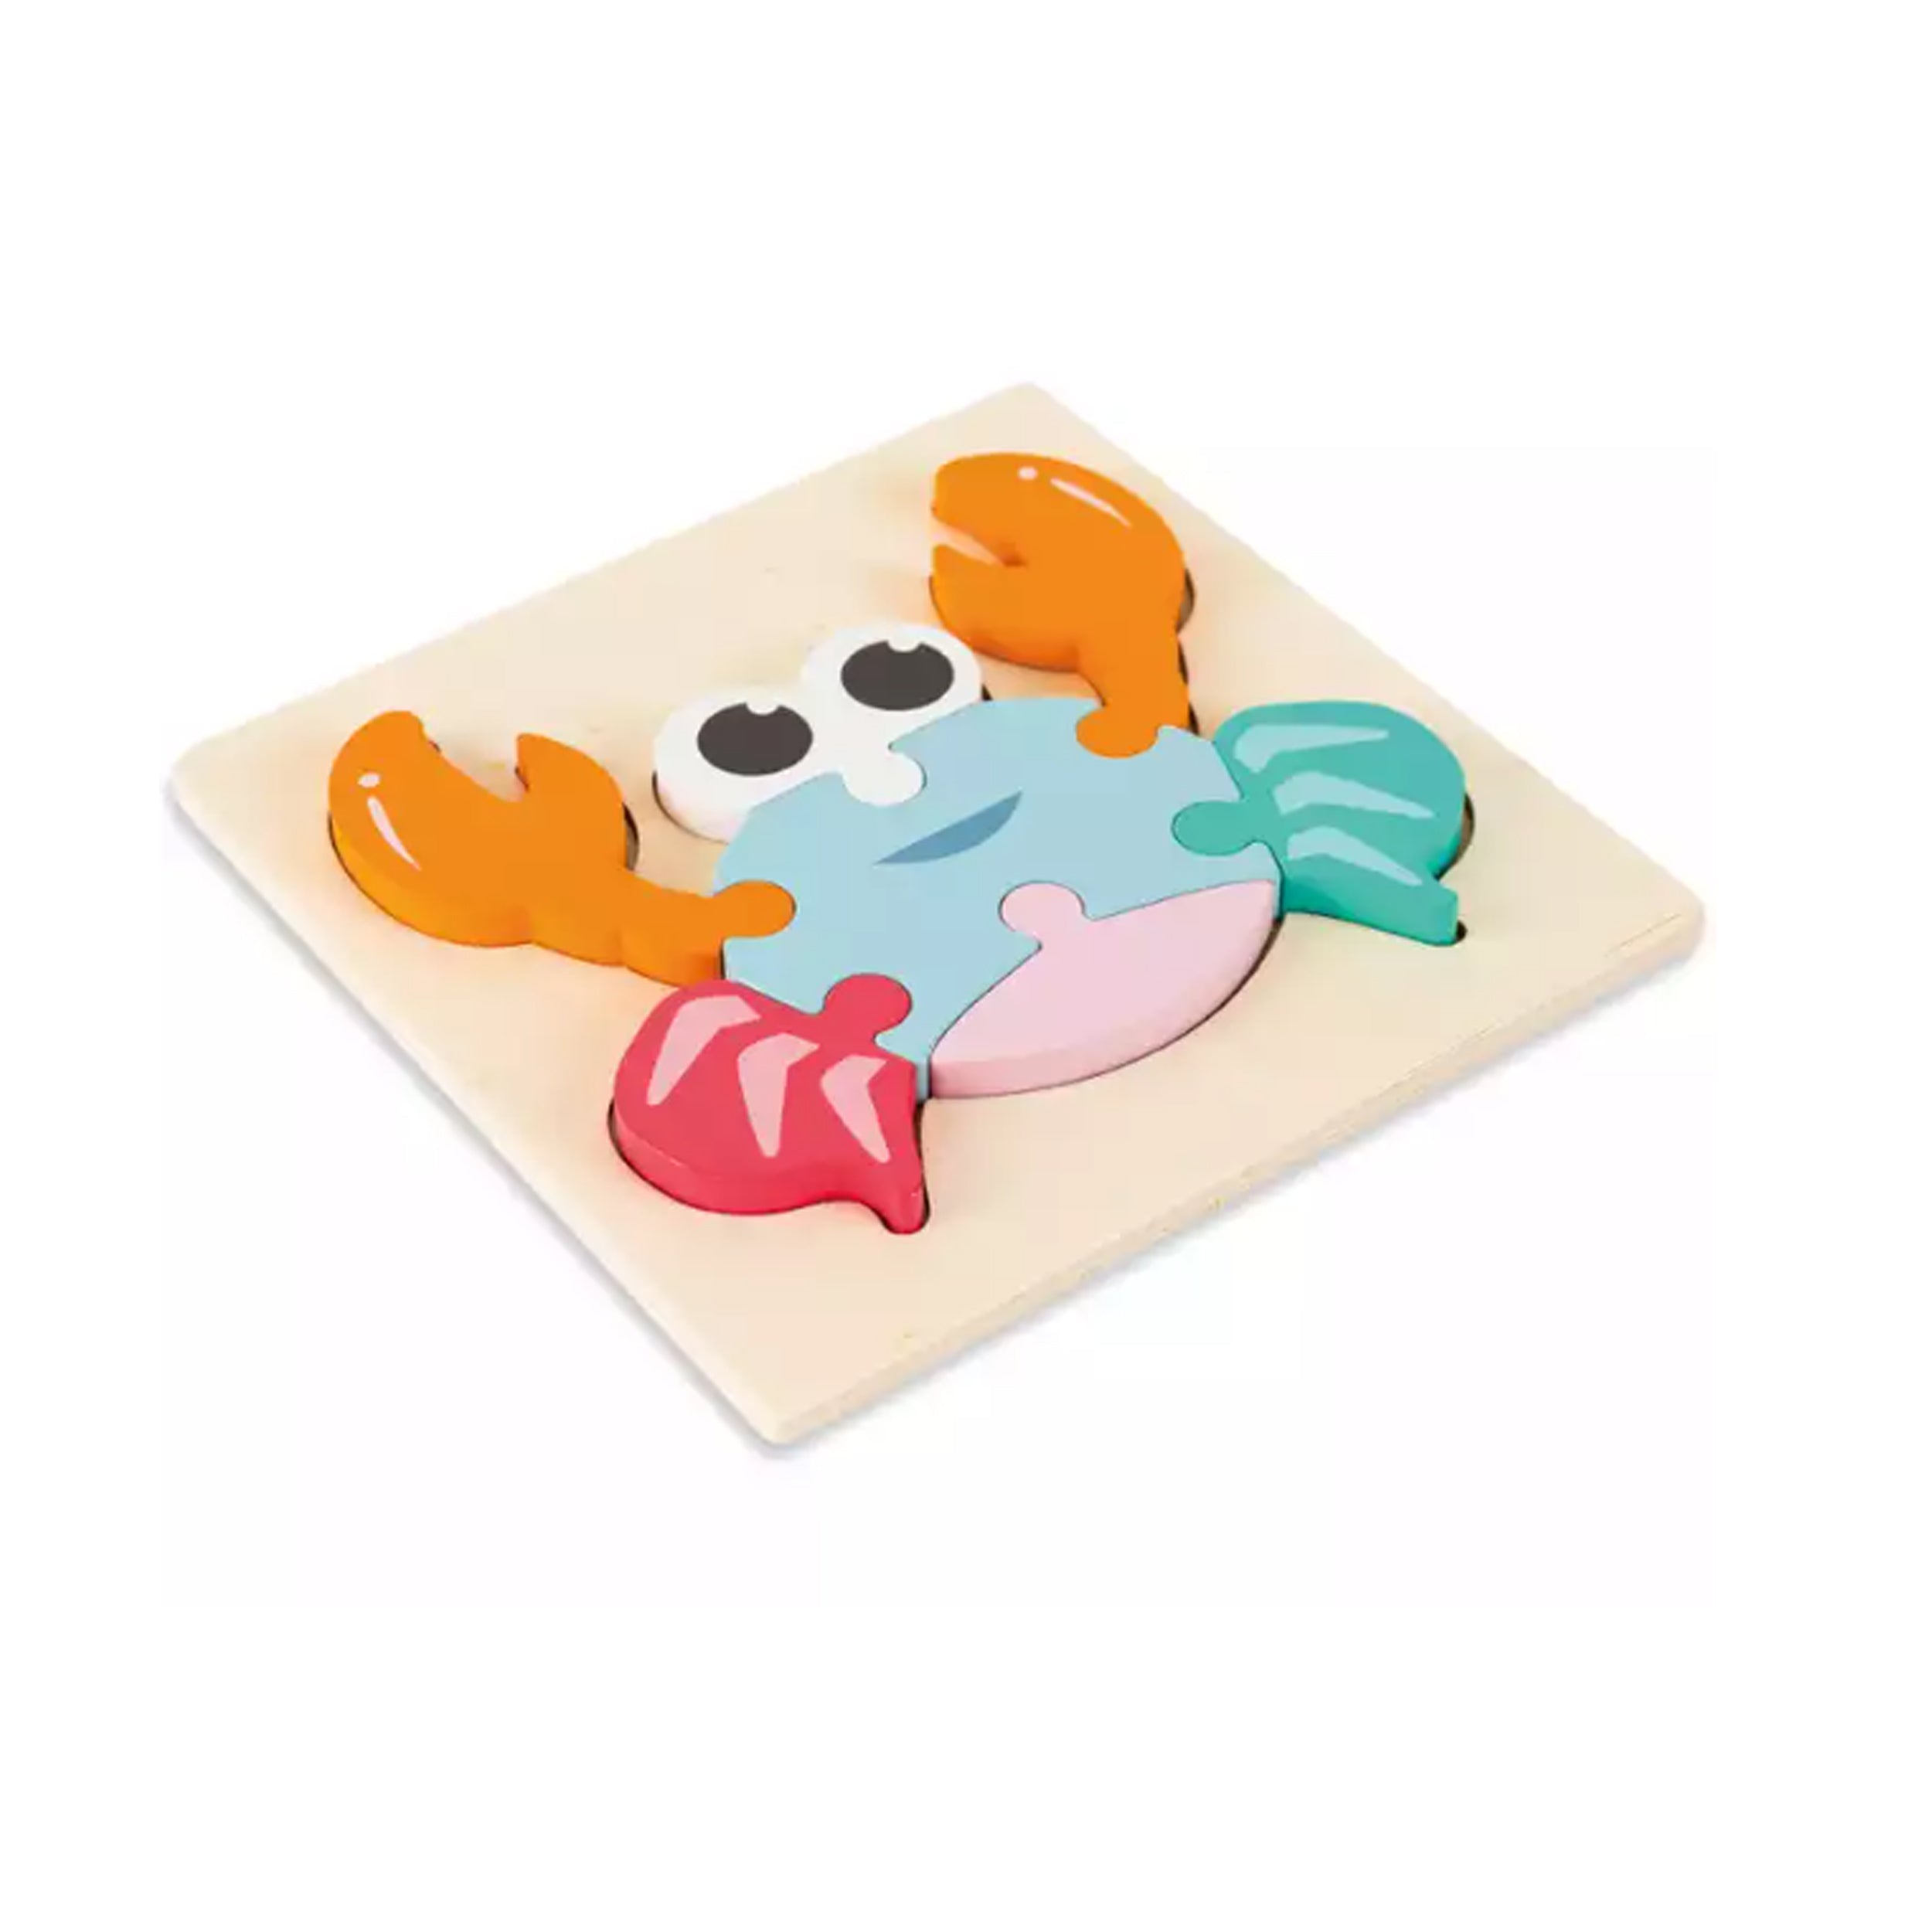 Animal Wooden Baby 3D Puzzle - Fun and Educational Toy for Early Childhood Development